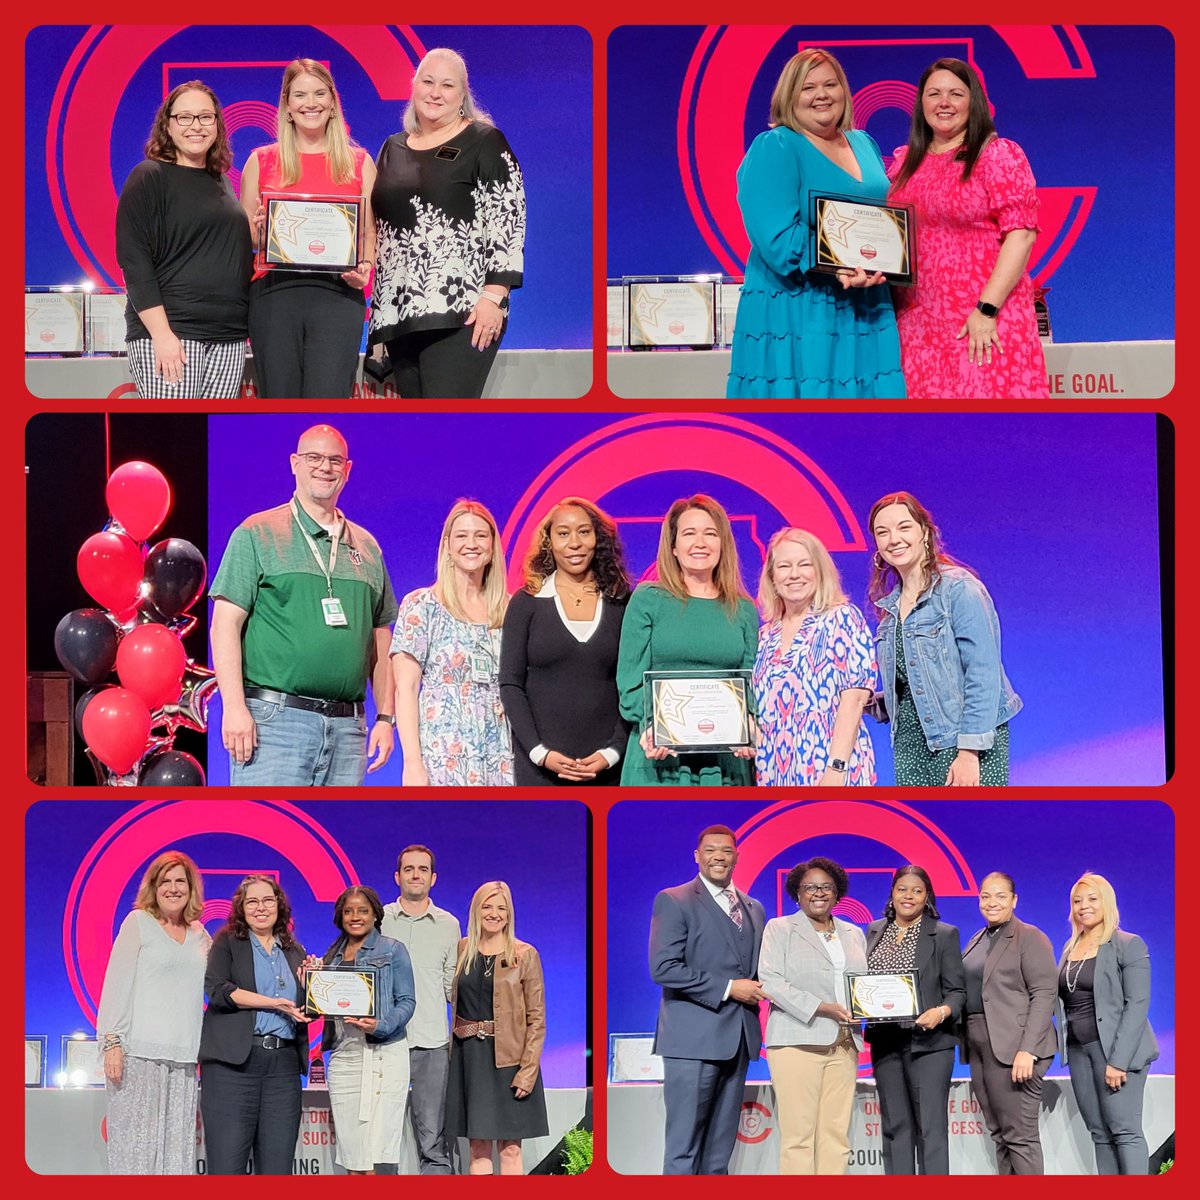 A big congratulations to the first five @CobbSchools to receive the distinguished Cobb School Counseling Comprehensive Model Certification who were recognized today! @Daniellcounsel2 @FloydPanthers @GriffinCounsel1 @belmontbears @KMHS_counseling #CSCCM